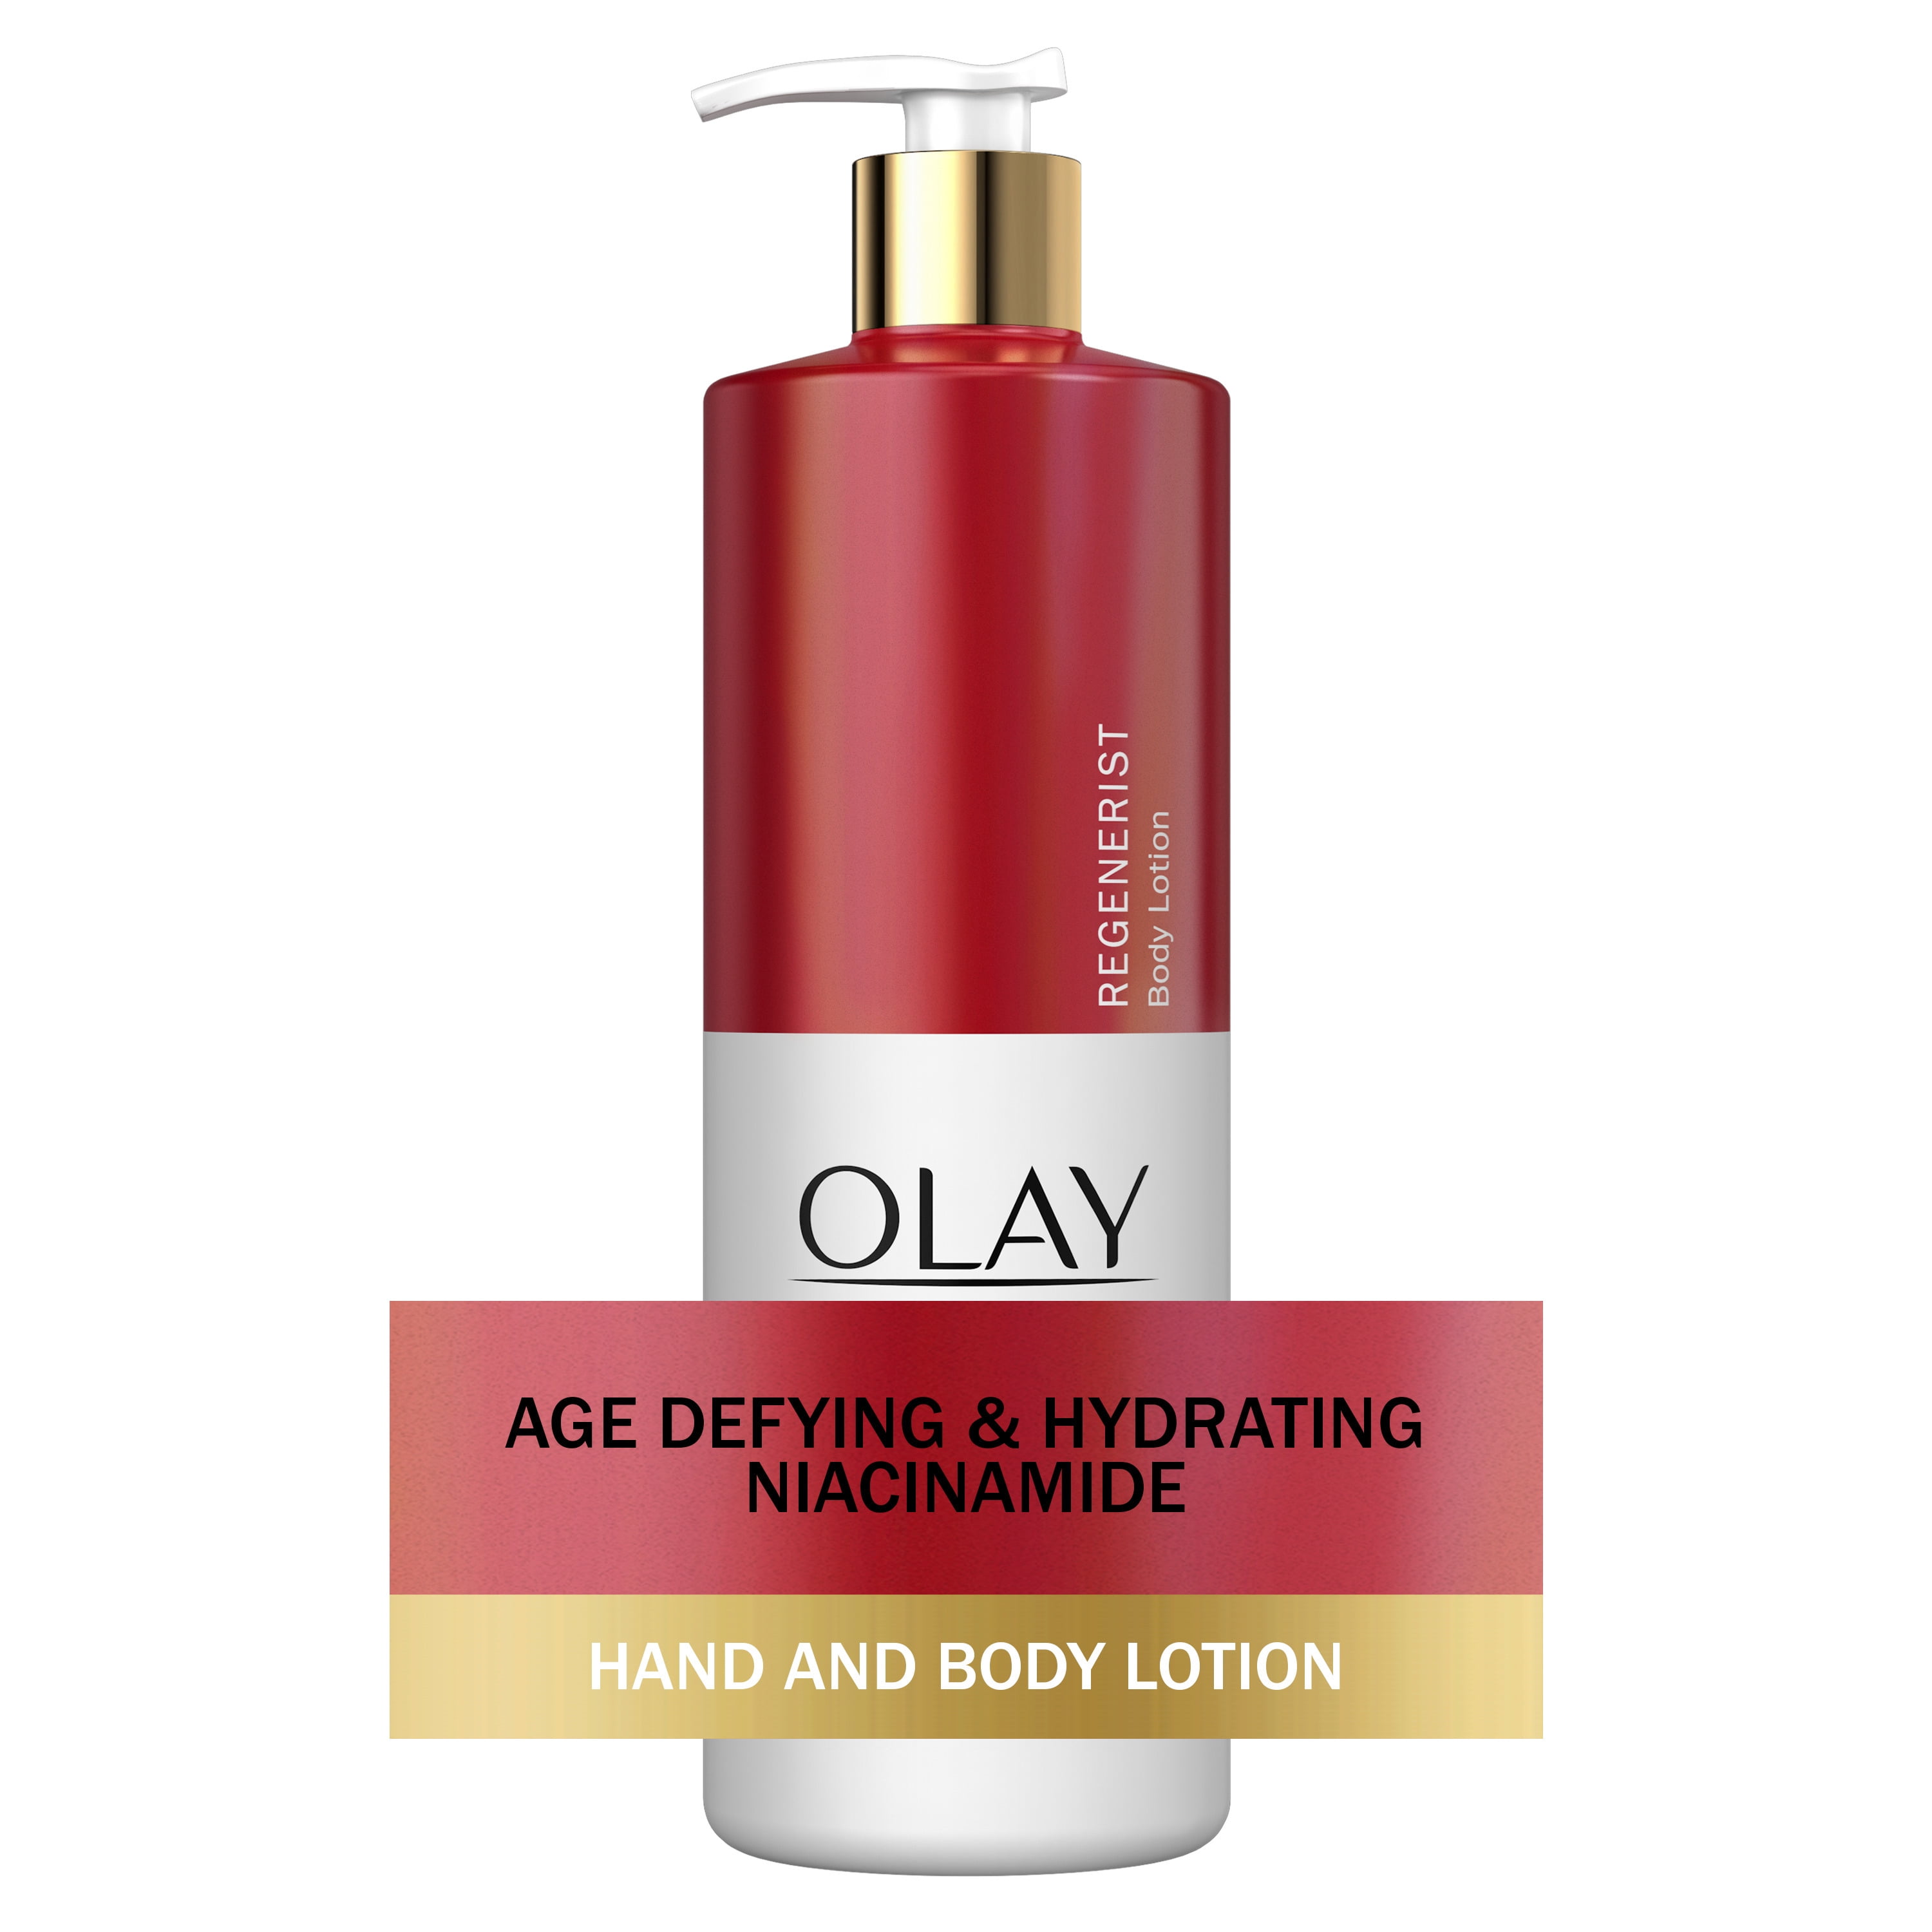 Olay Age Defying & Hydrating Niacinamide Hand and Body Lotion 17 fl oz